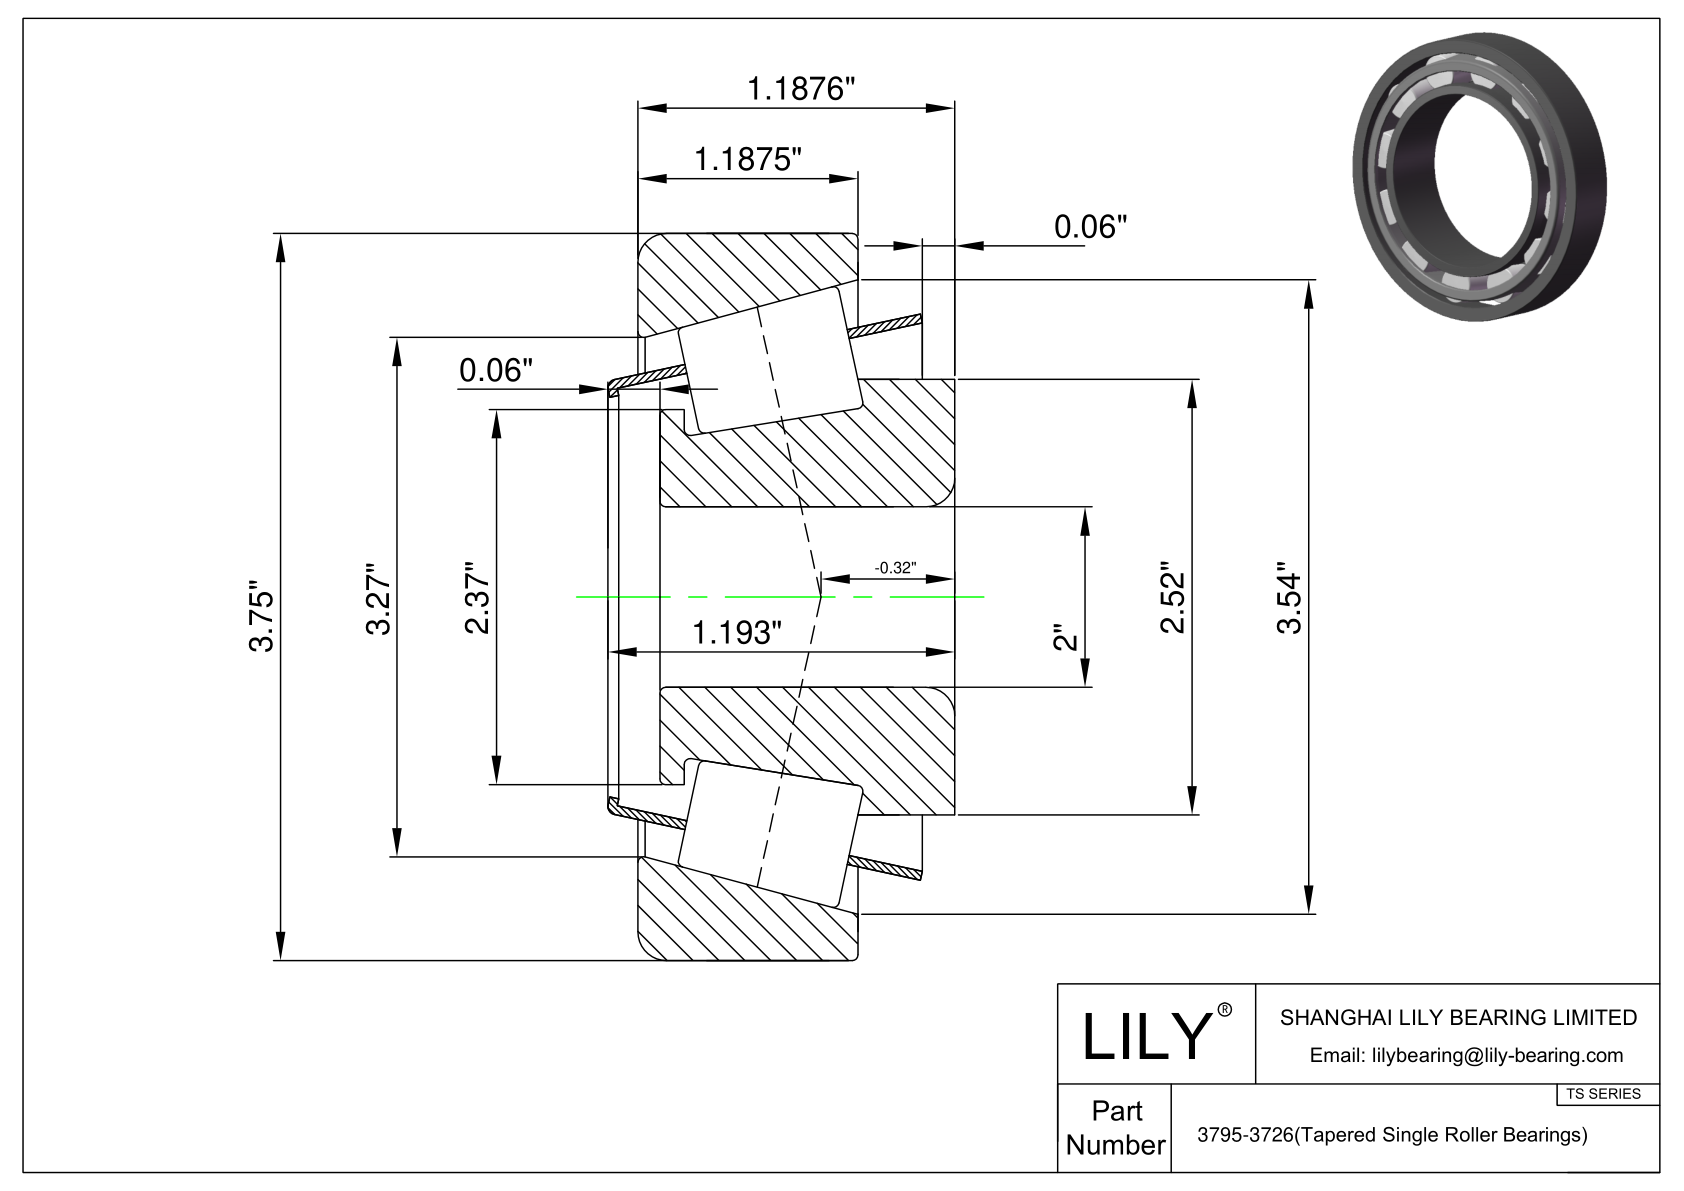 3795-3726 TS (Tapered Single Roller Bearings) (Imperial) cad drawing